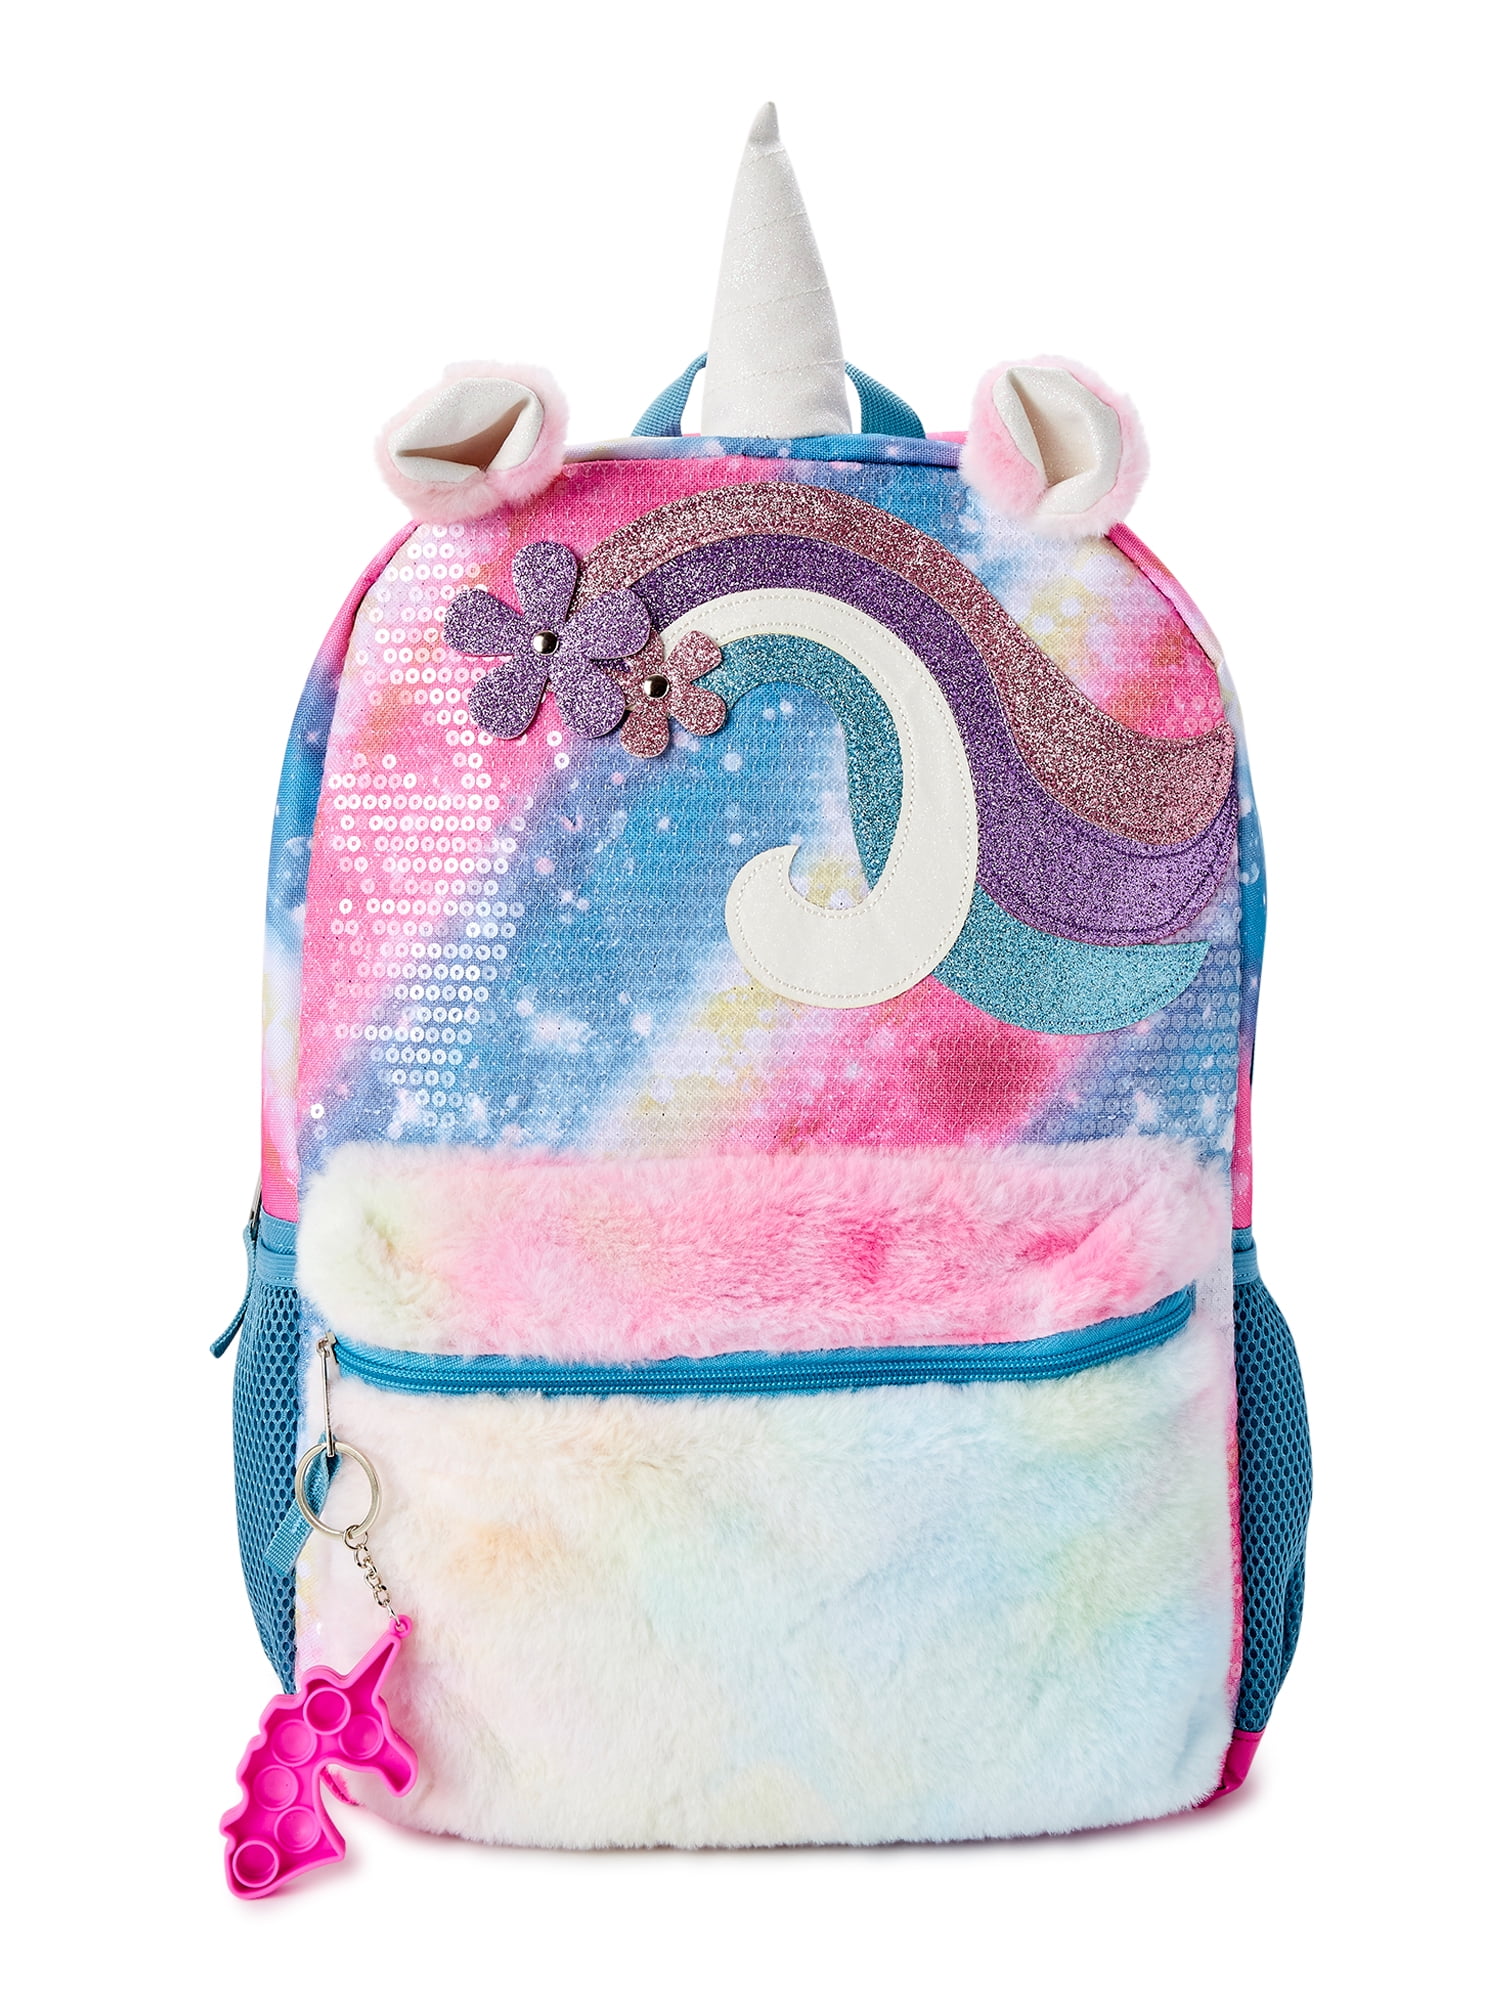 Unicorns Personalized Large Kids School Backpack with Side Pockets +  Reviews